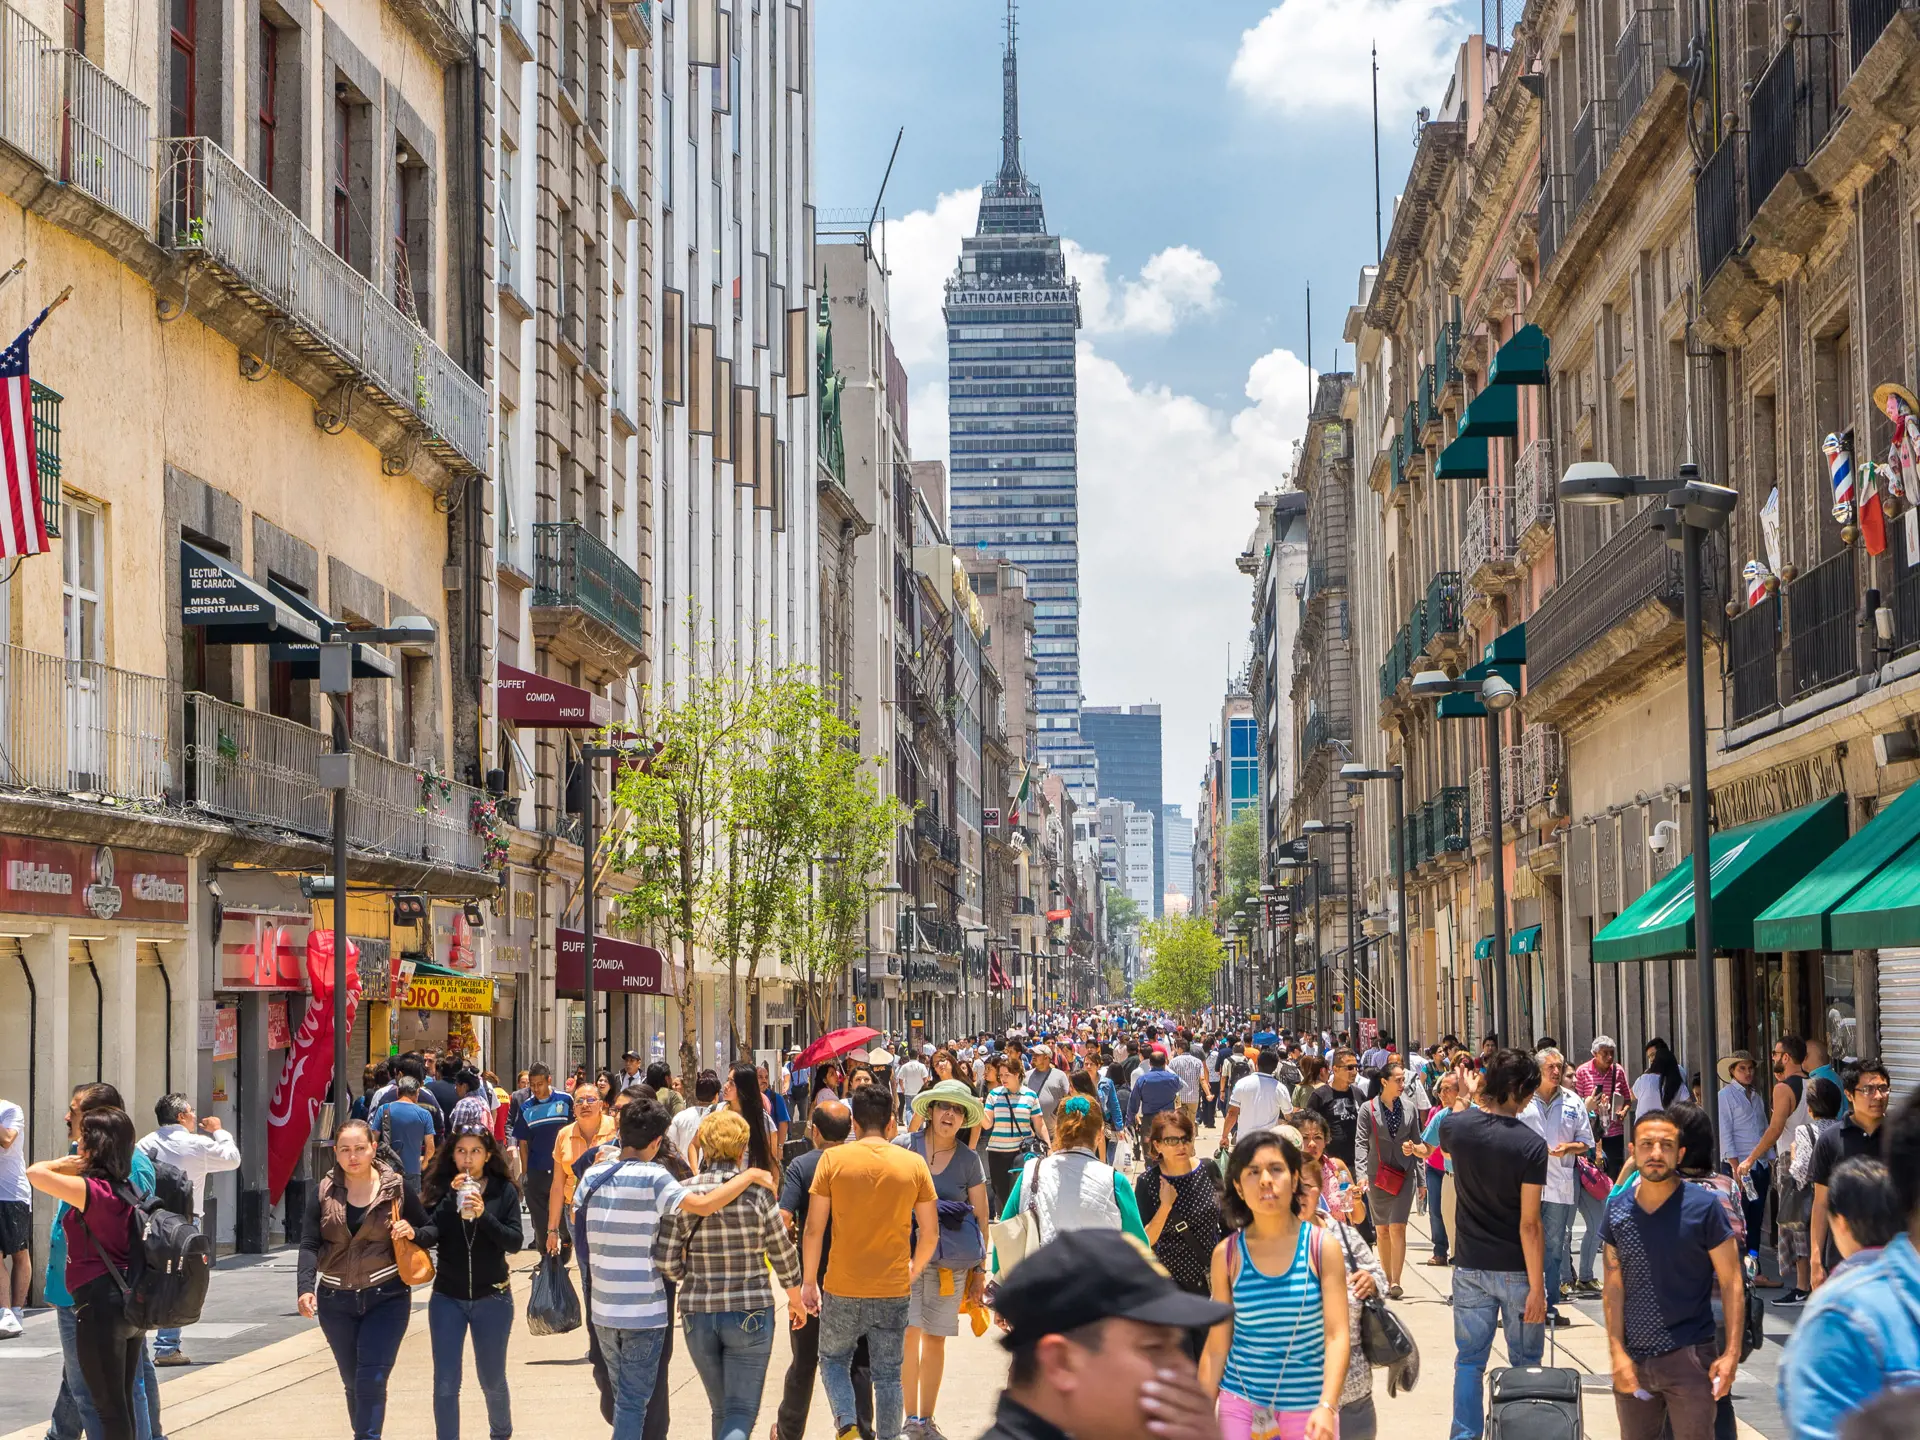 shutterstock_711774175 Mexico city, Mexico - Jul 7, 2016 Crowds in the city center.jpg